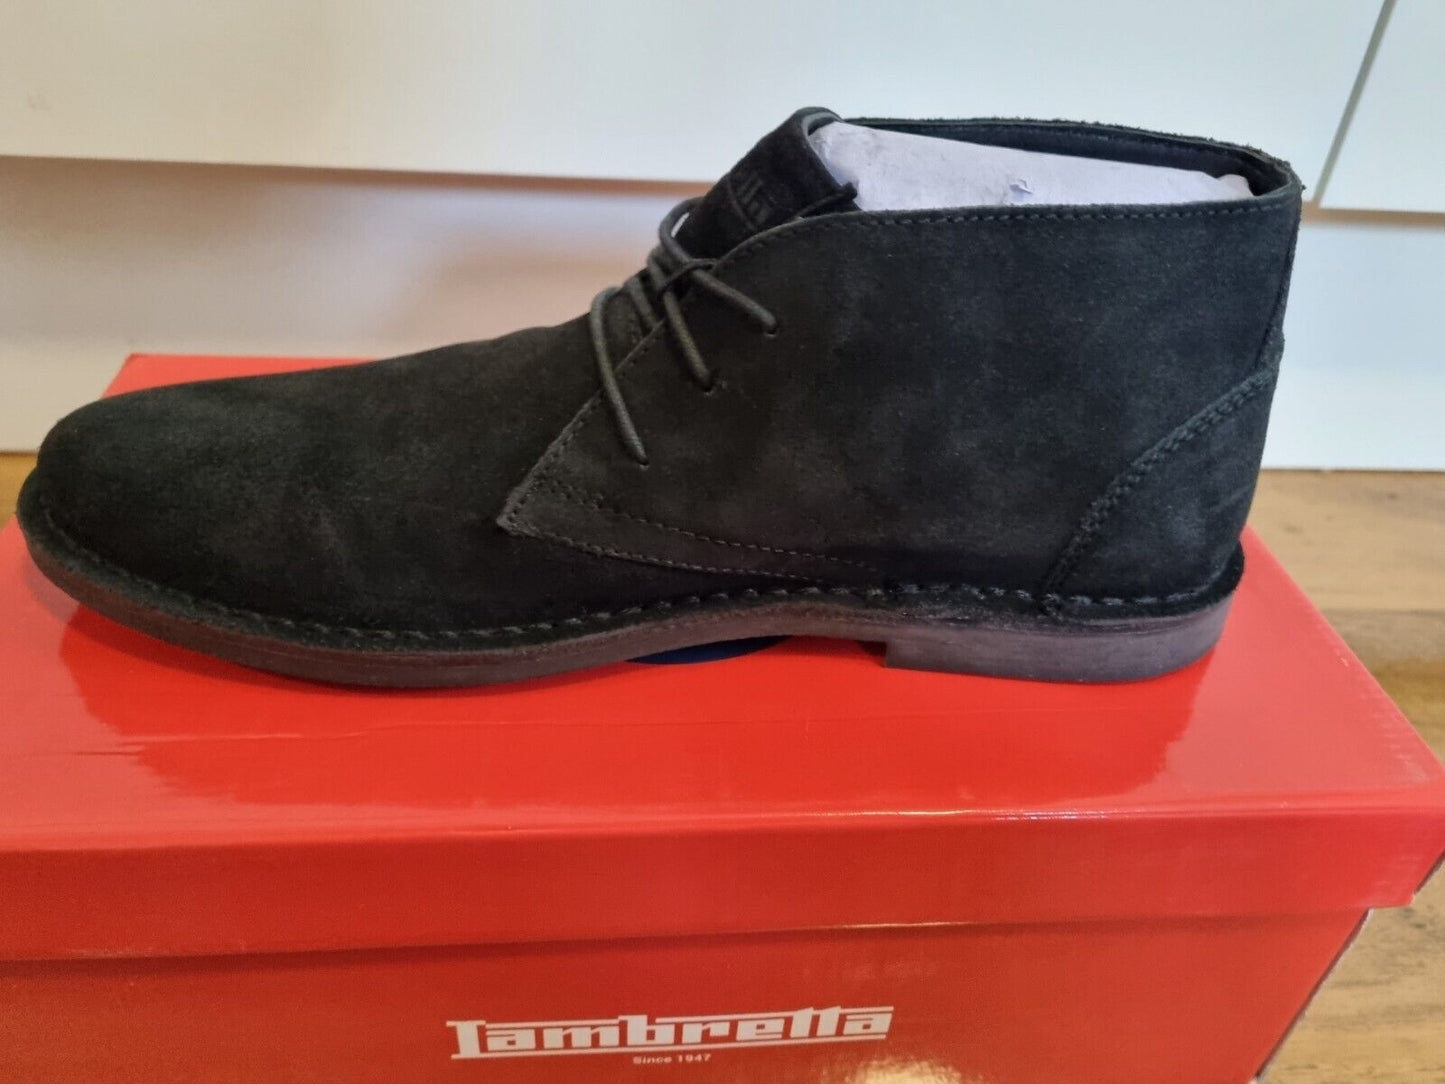 Desert Boot by Lambretta - Chiswick 3 Eye  – Black Suede Leather (M194AS)